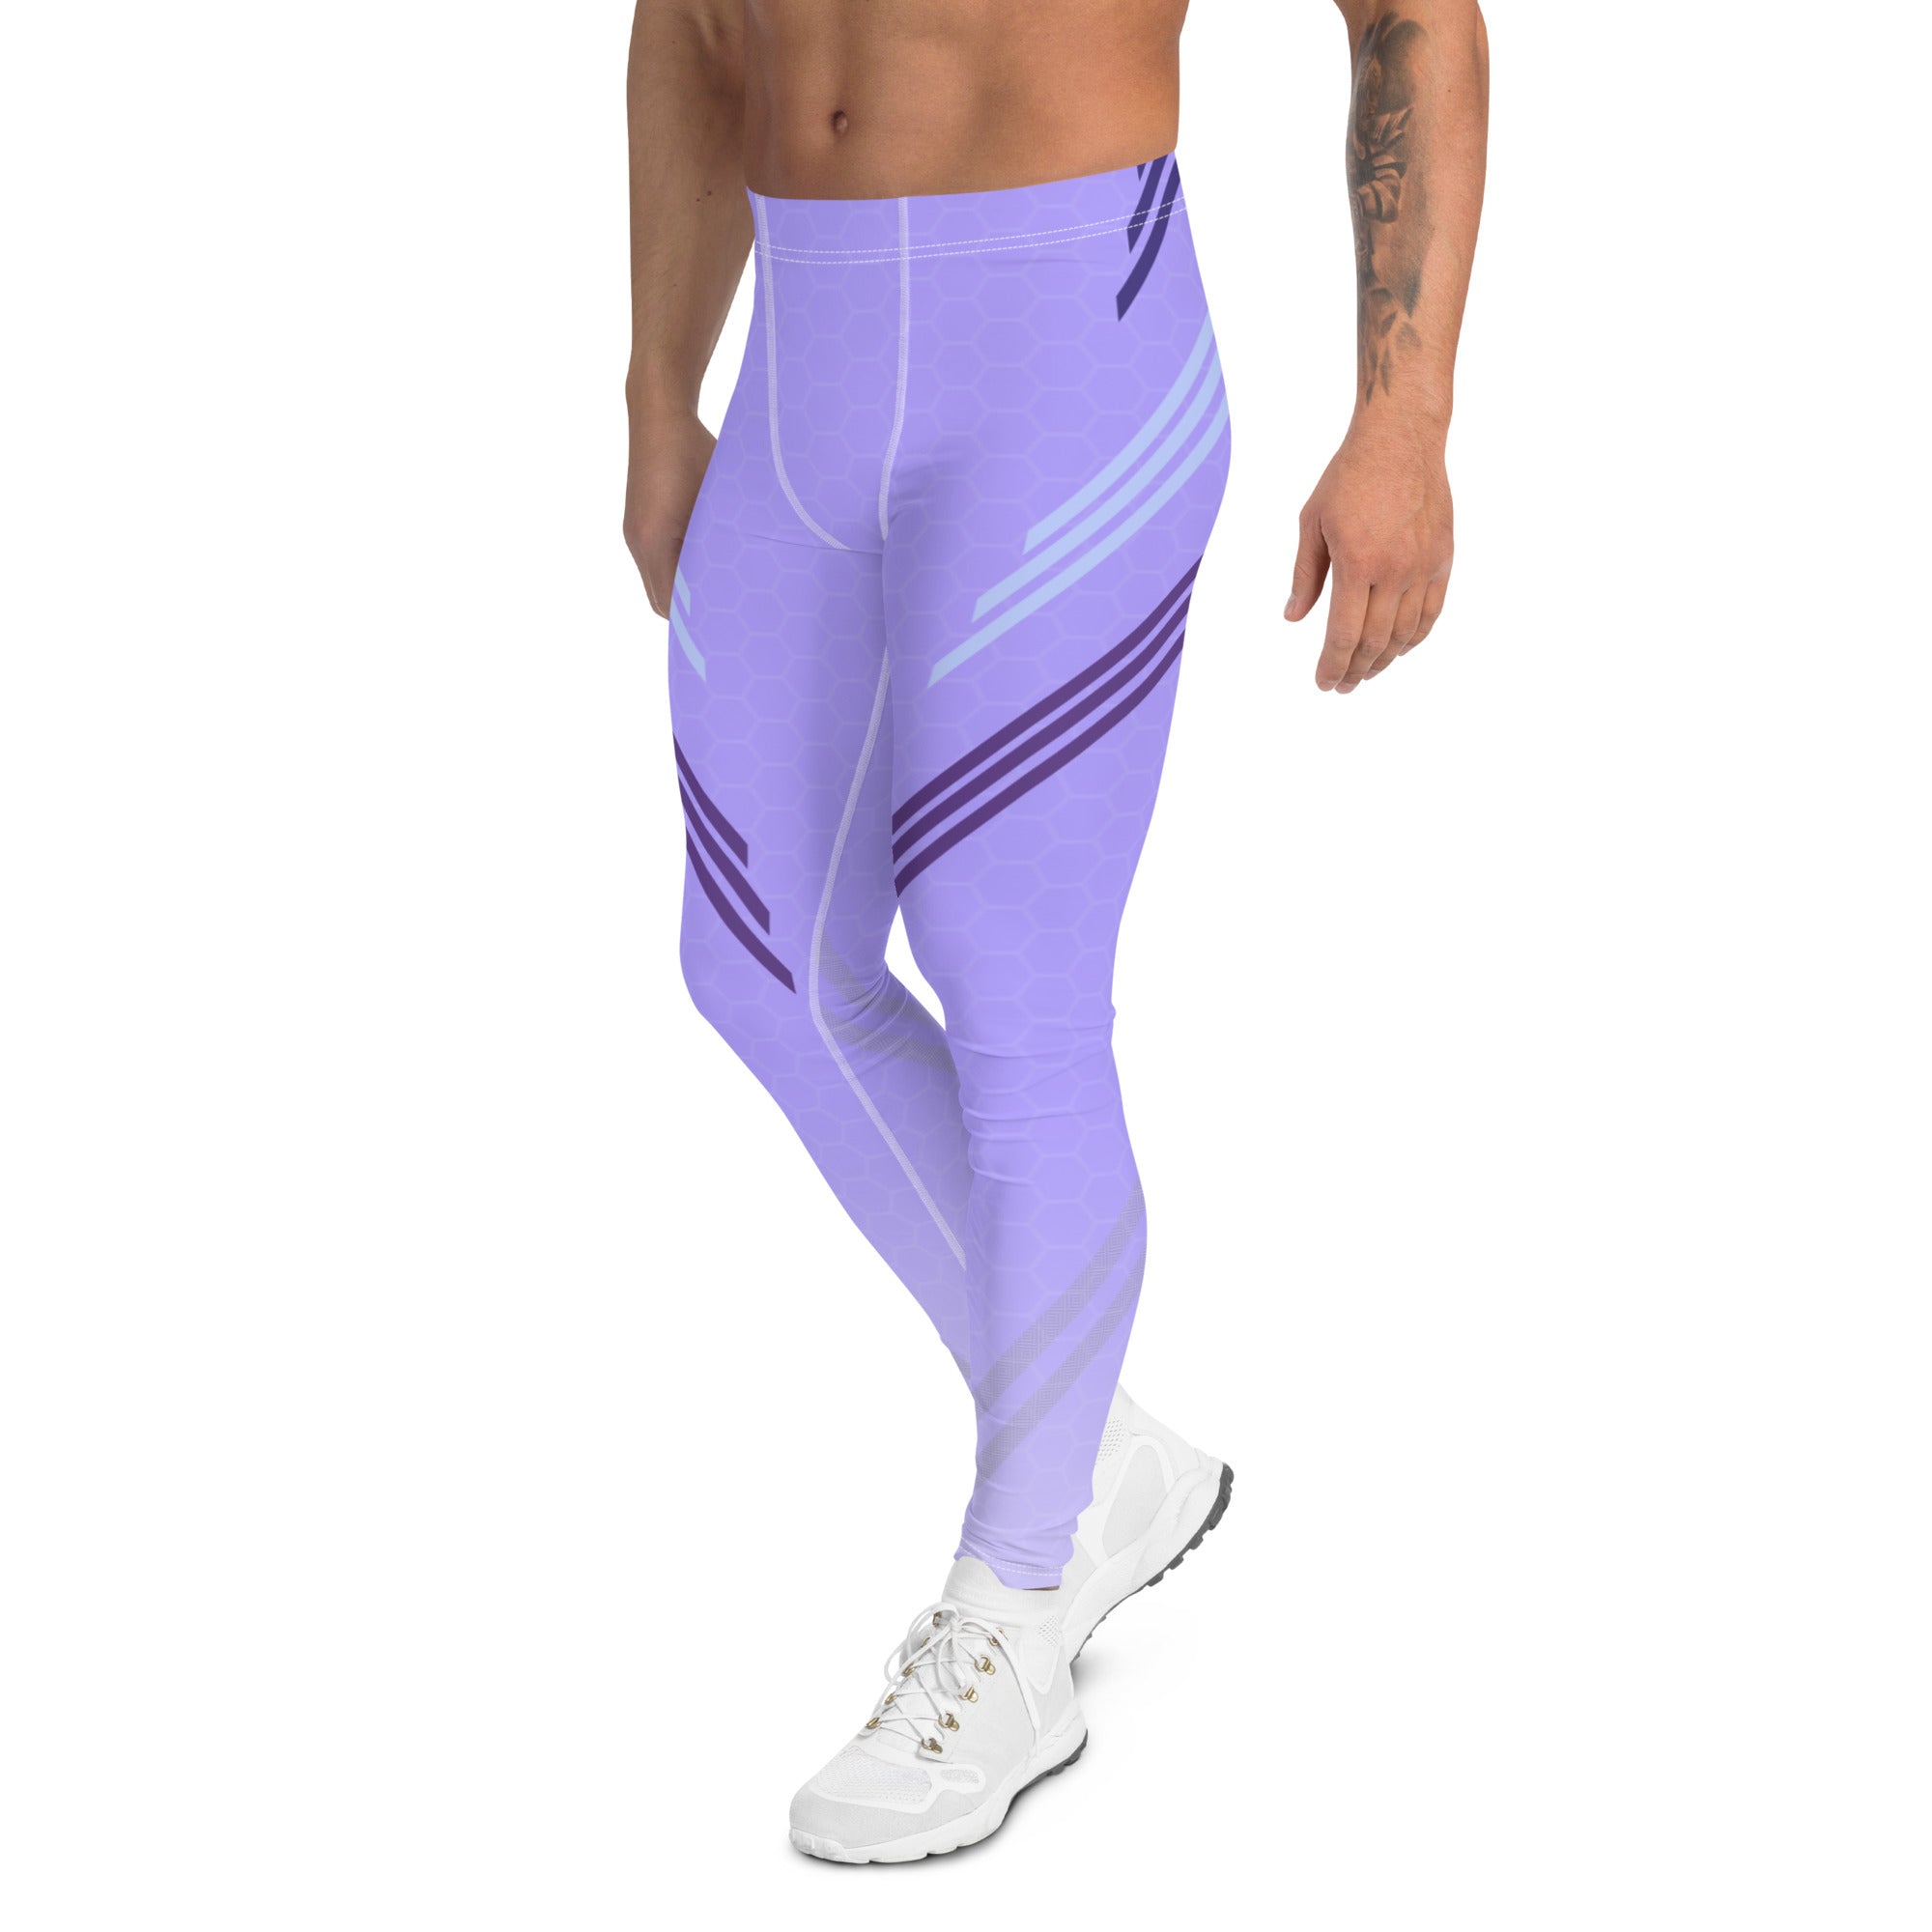 Lavender Theys Plus-Size/High-Waisted Bodybuilding Tights